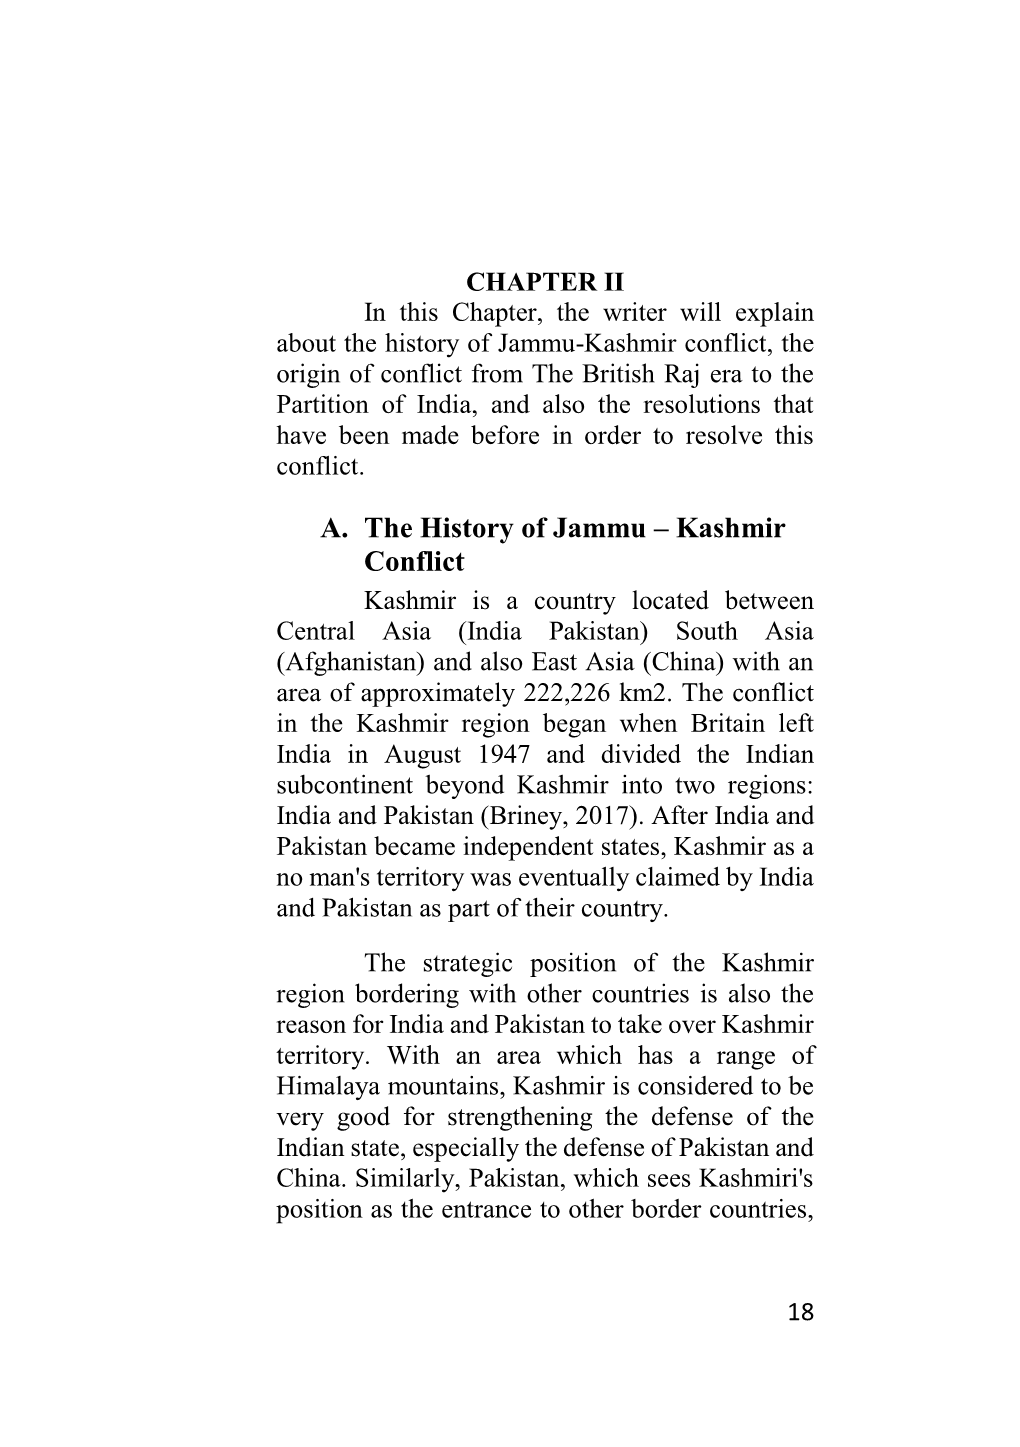 A. the History of Jammu – Kashmir Conflict